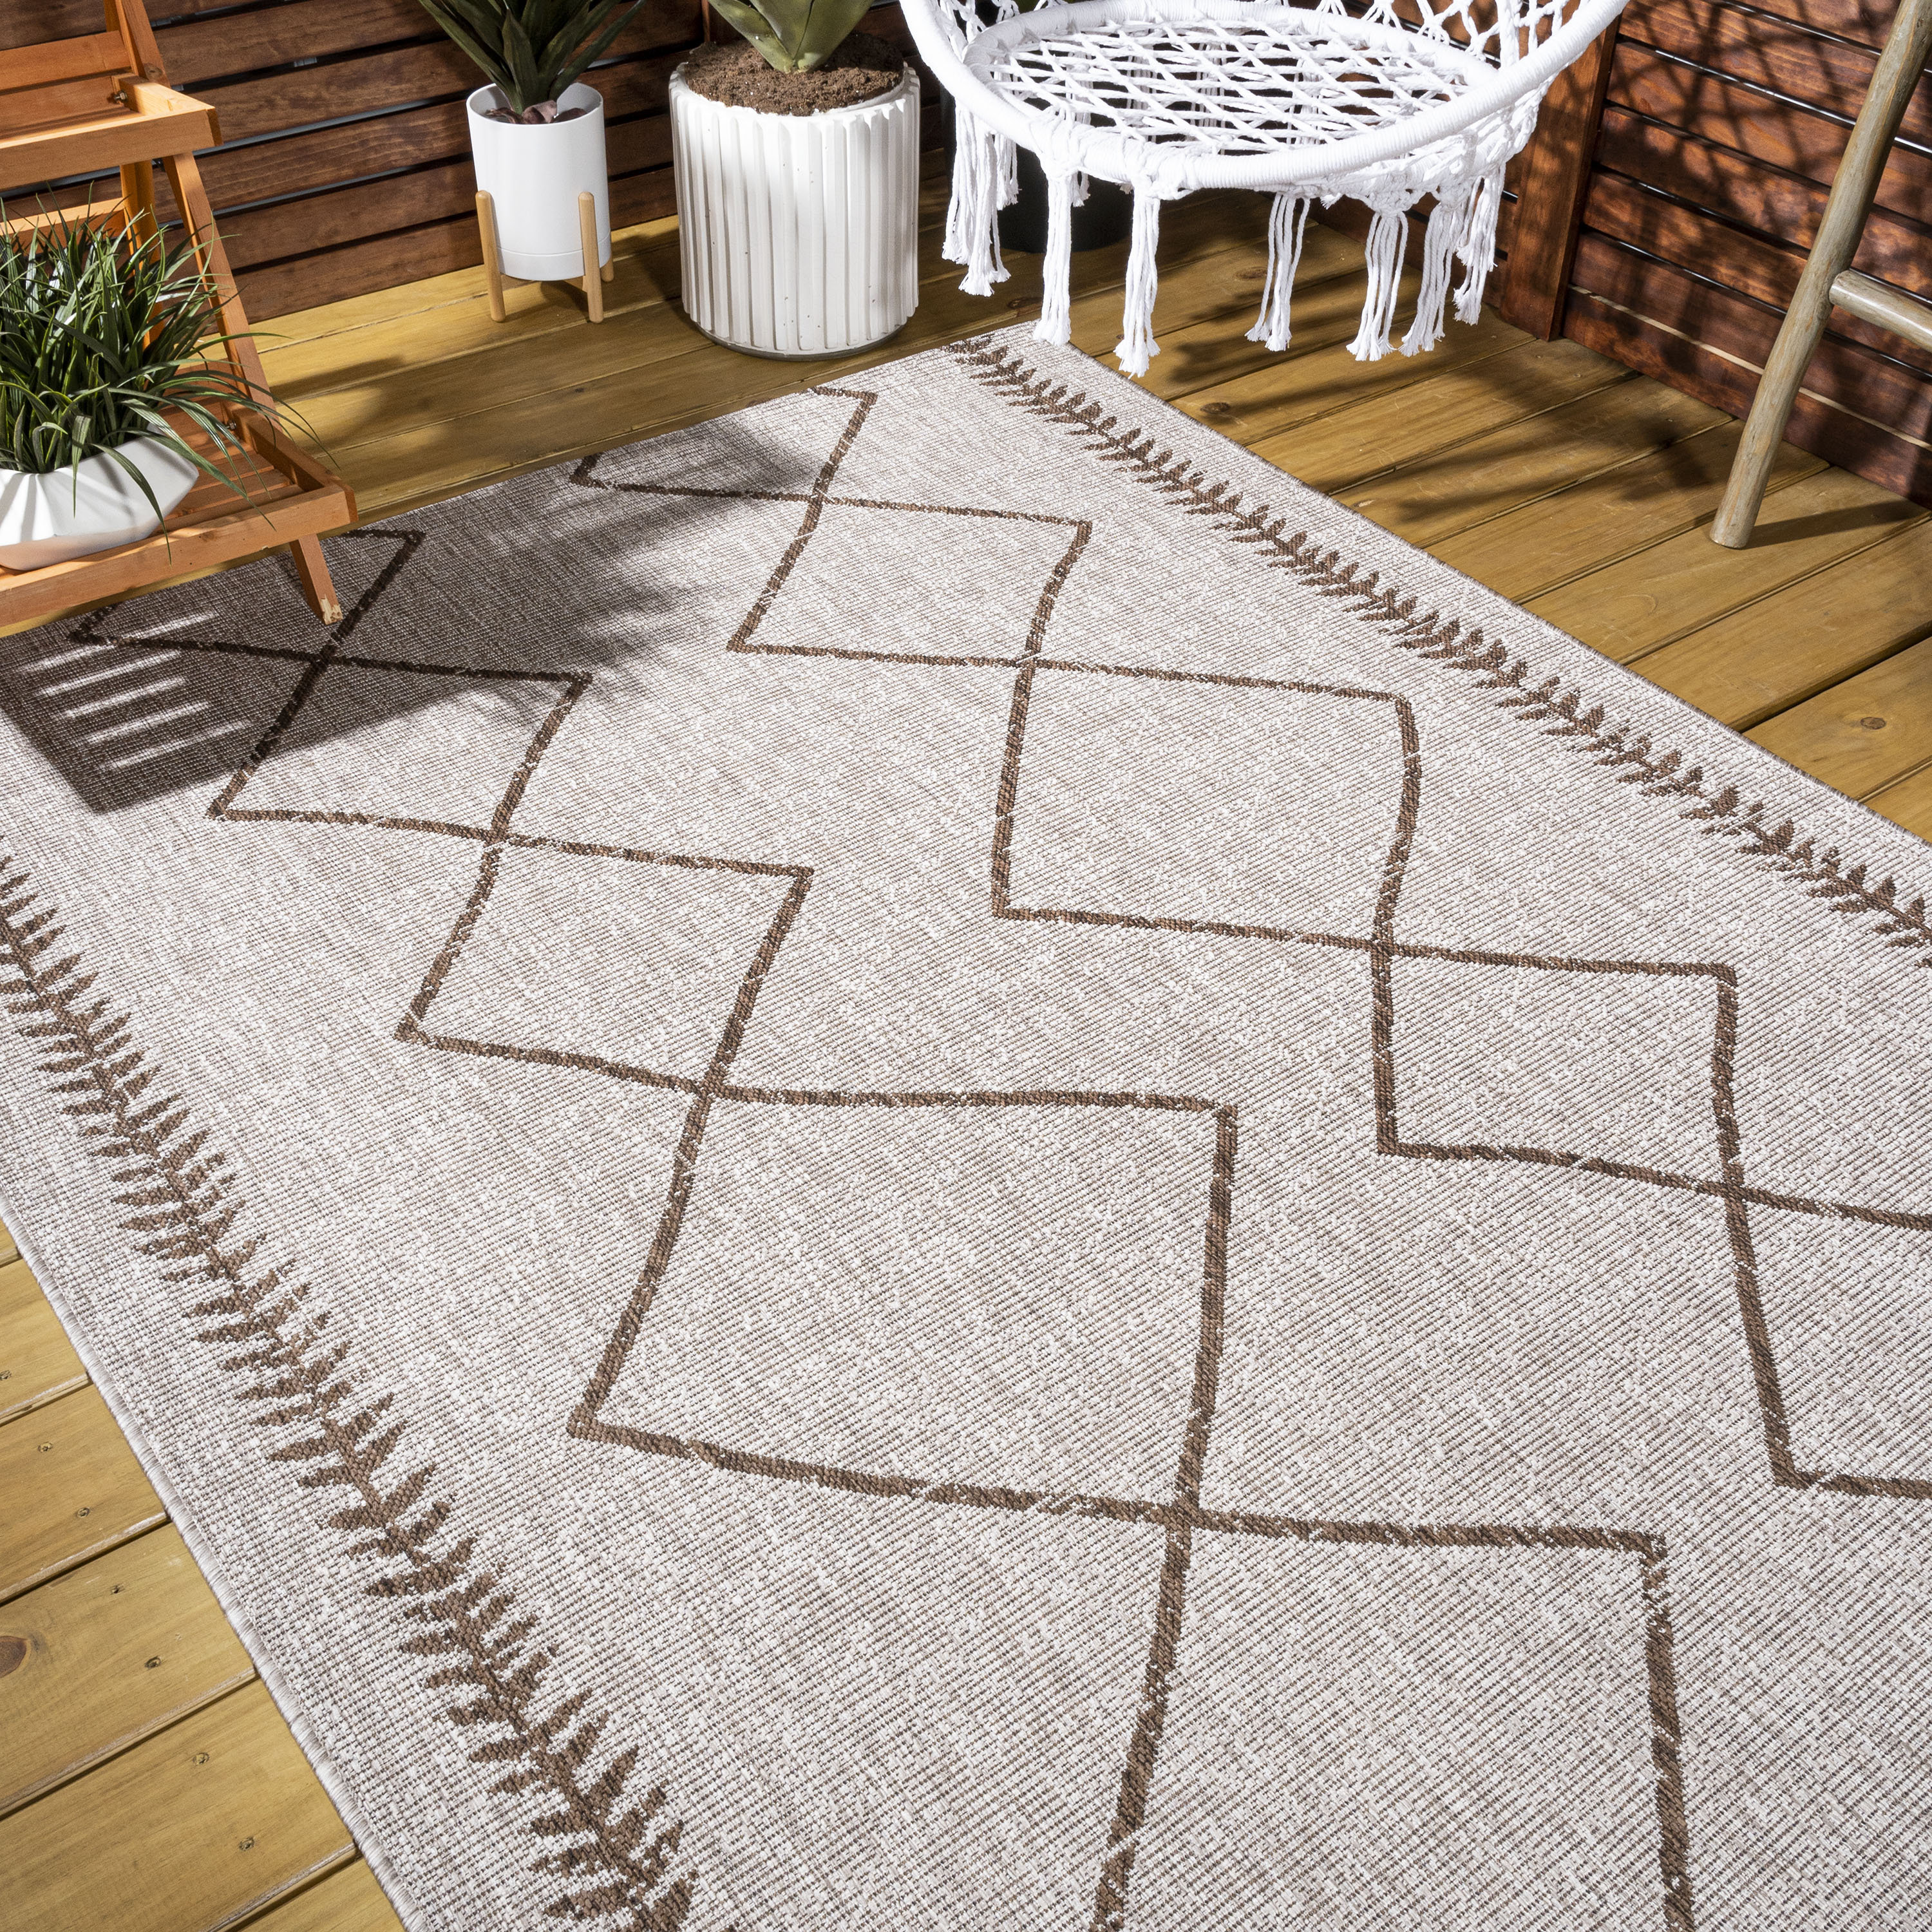  Area Rug Living Room Rugs: 8x10 Large Soft Machine Washable  Boho Moroccan Farmhouse Neutral Stain Resistant Indoor Floor Rug Carpet for  Bedroom Under Dining Table Home Office House Decor - Brown 